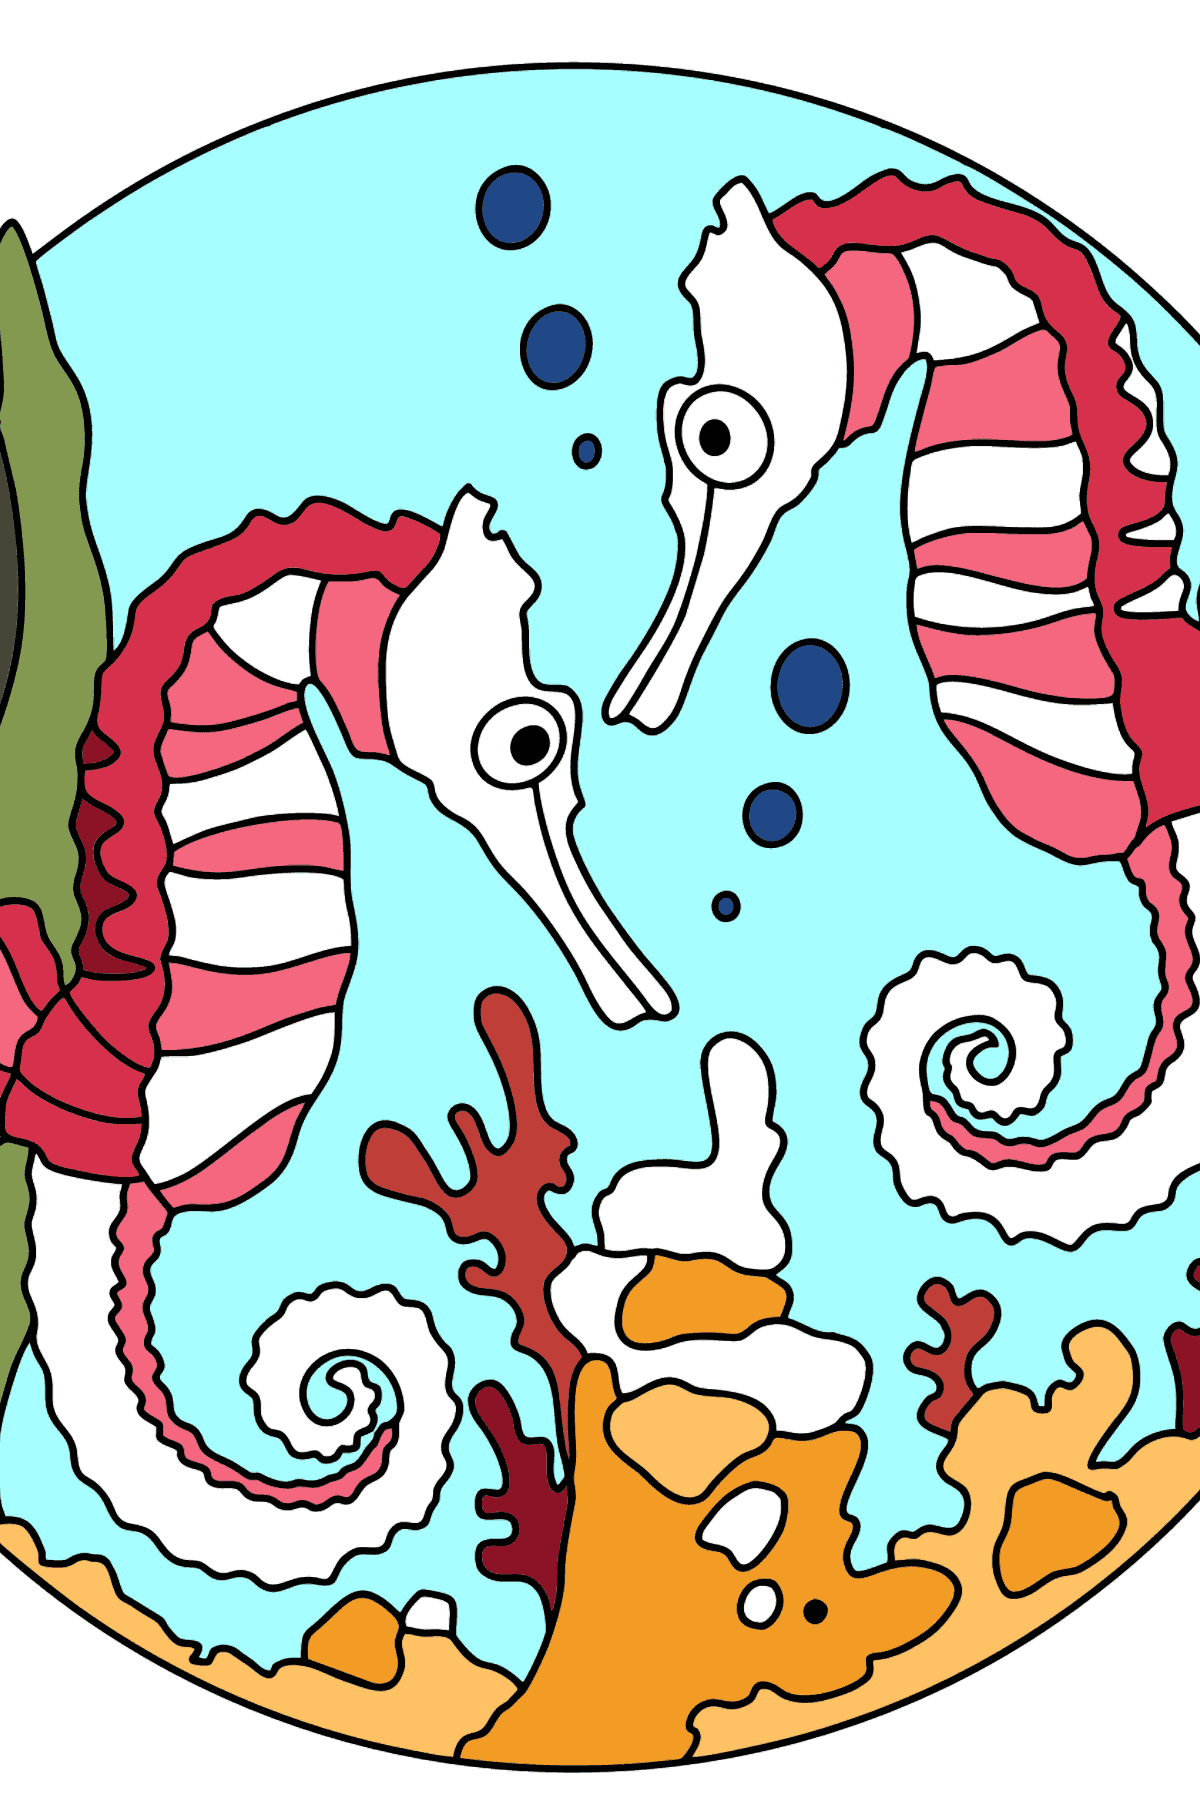 Two Seahorses Coloring Page - Coloring Pages for Kids